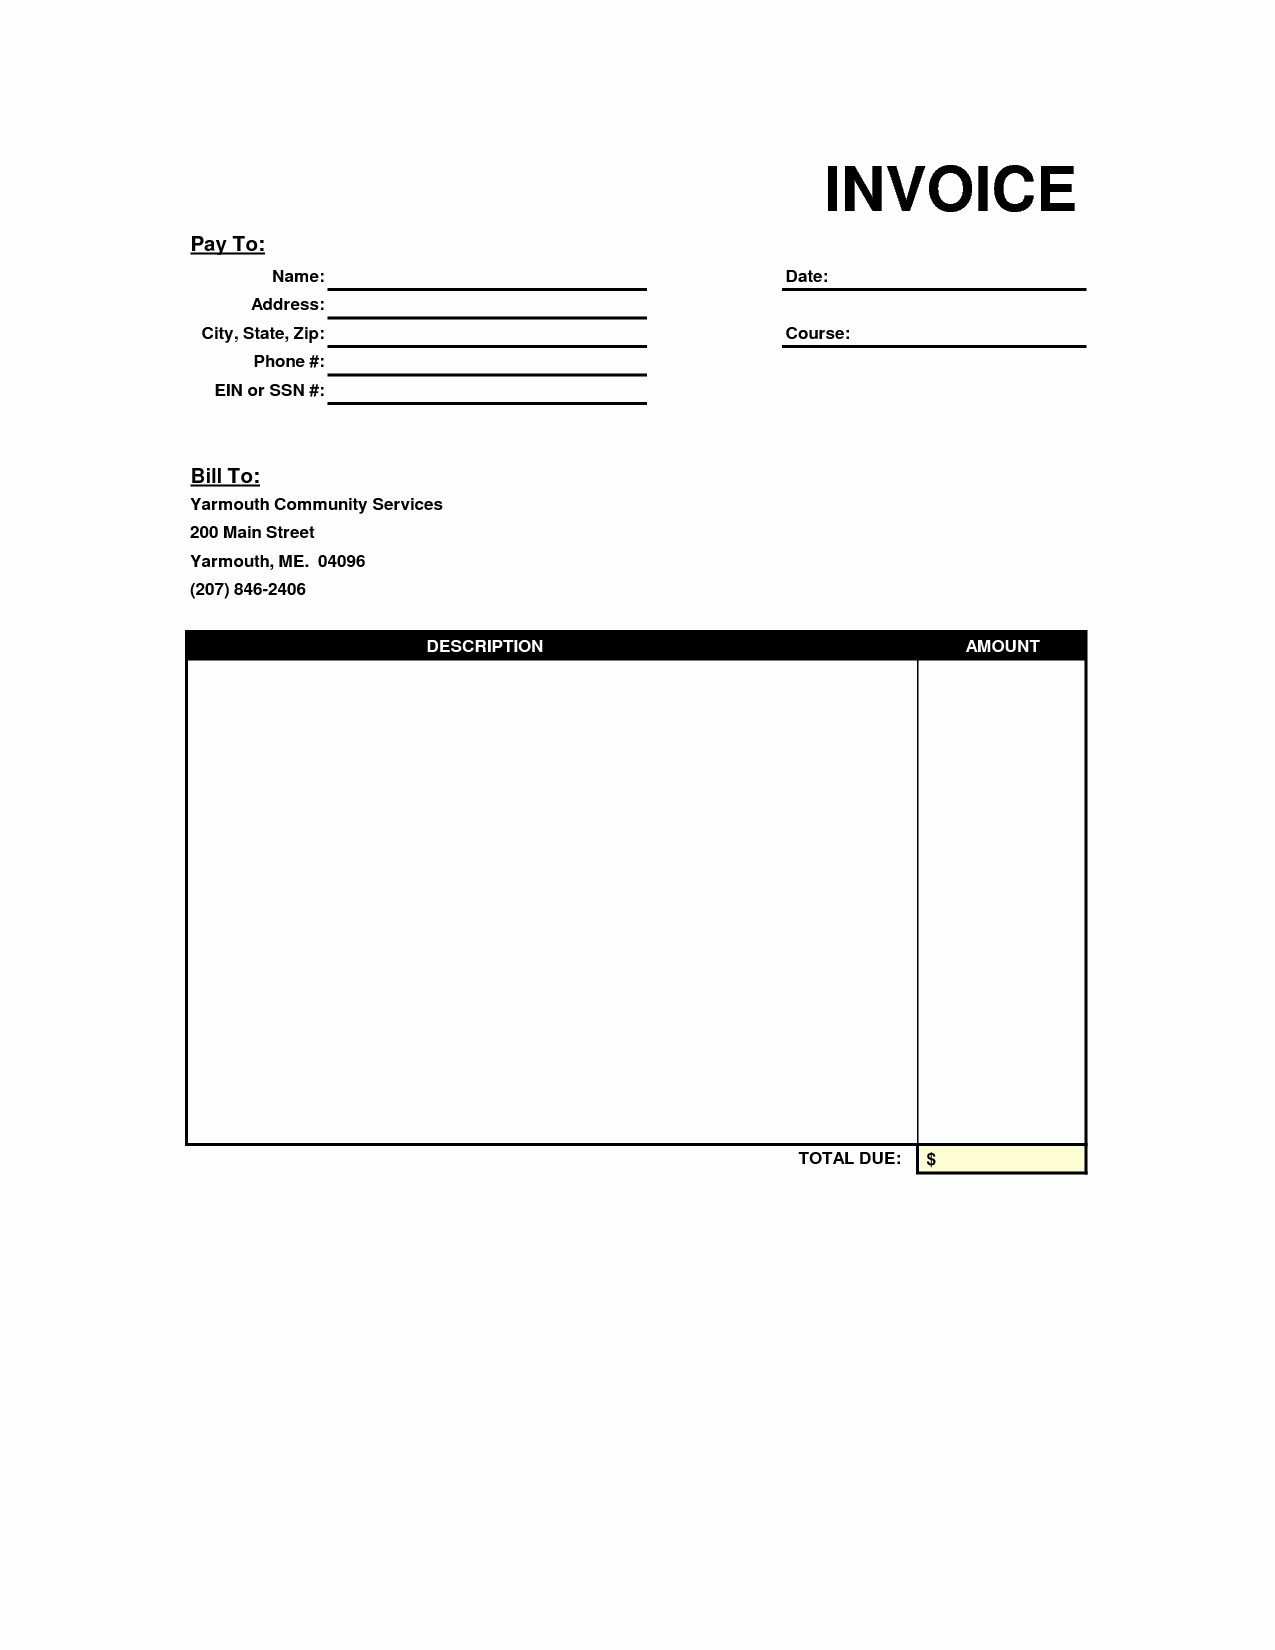 Excel Invoice Template Mac Lovely Invoice Templates for Mac Expense Spreadshee Invoice